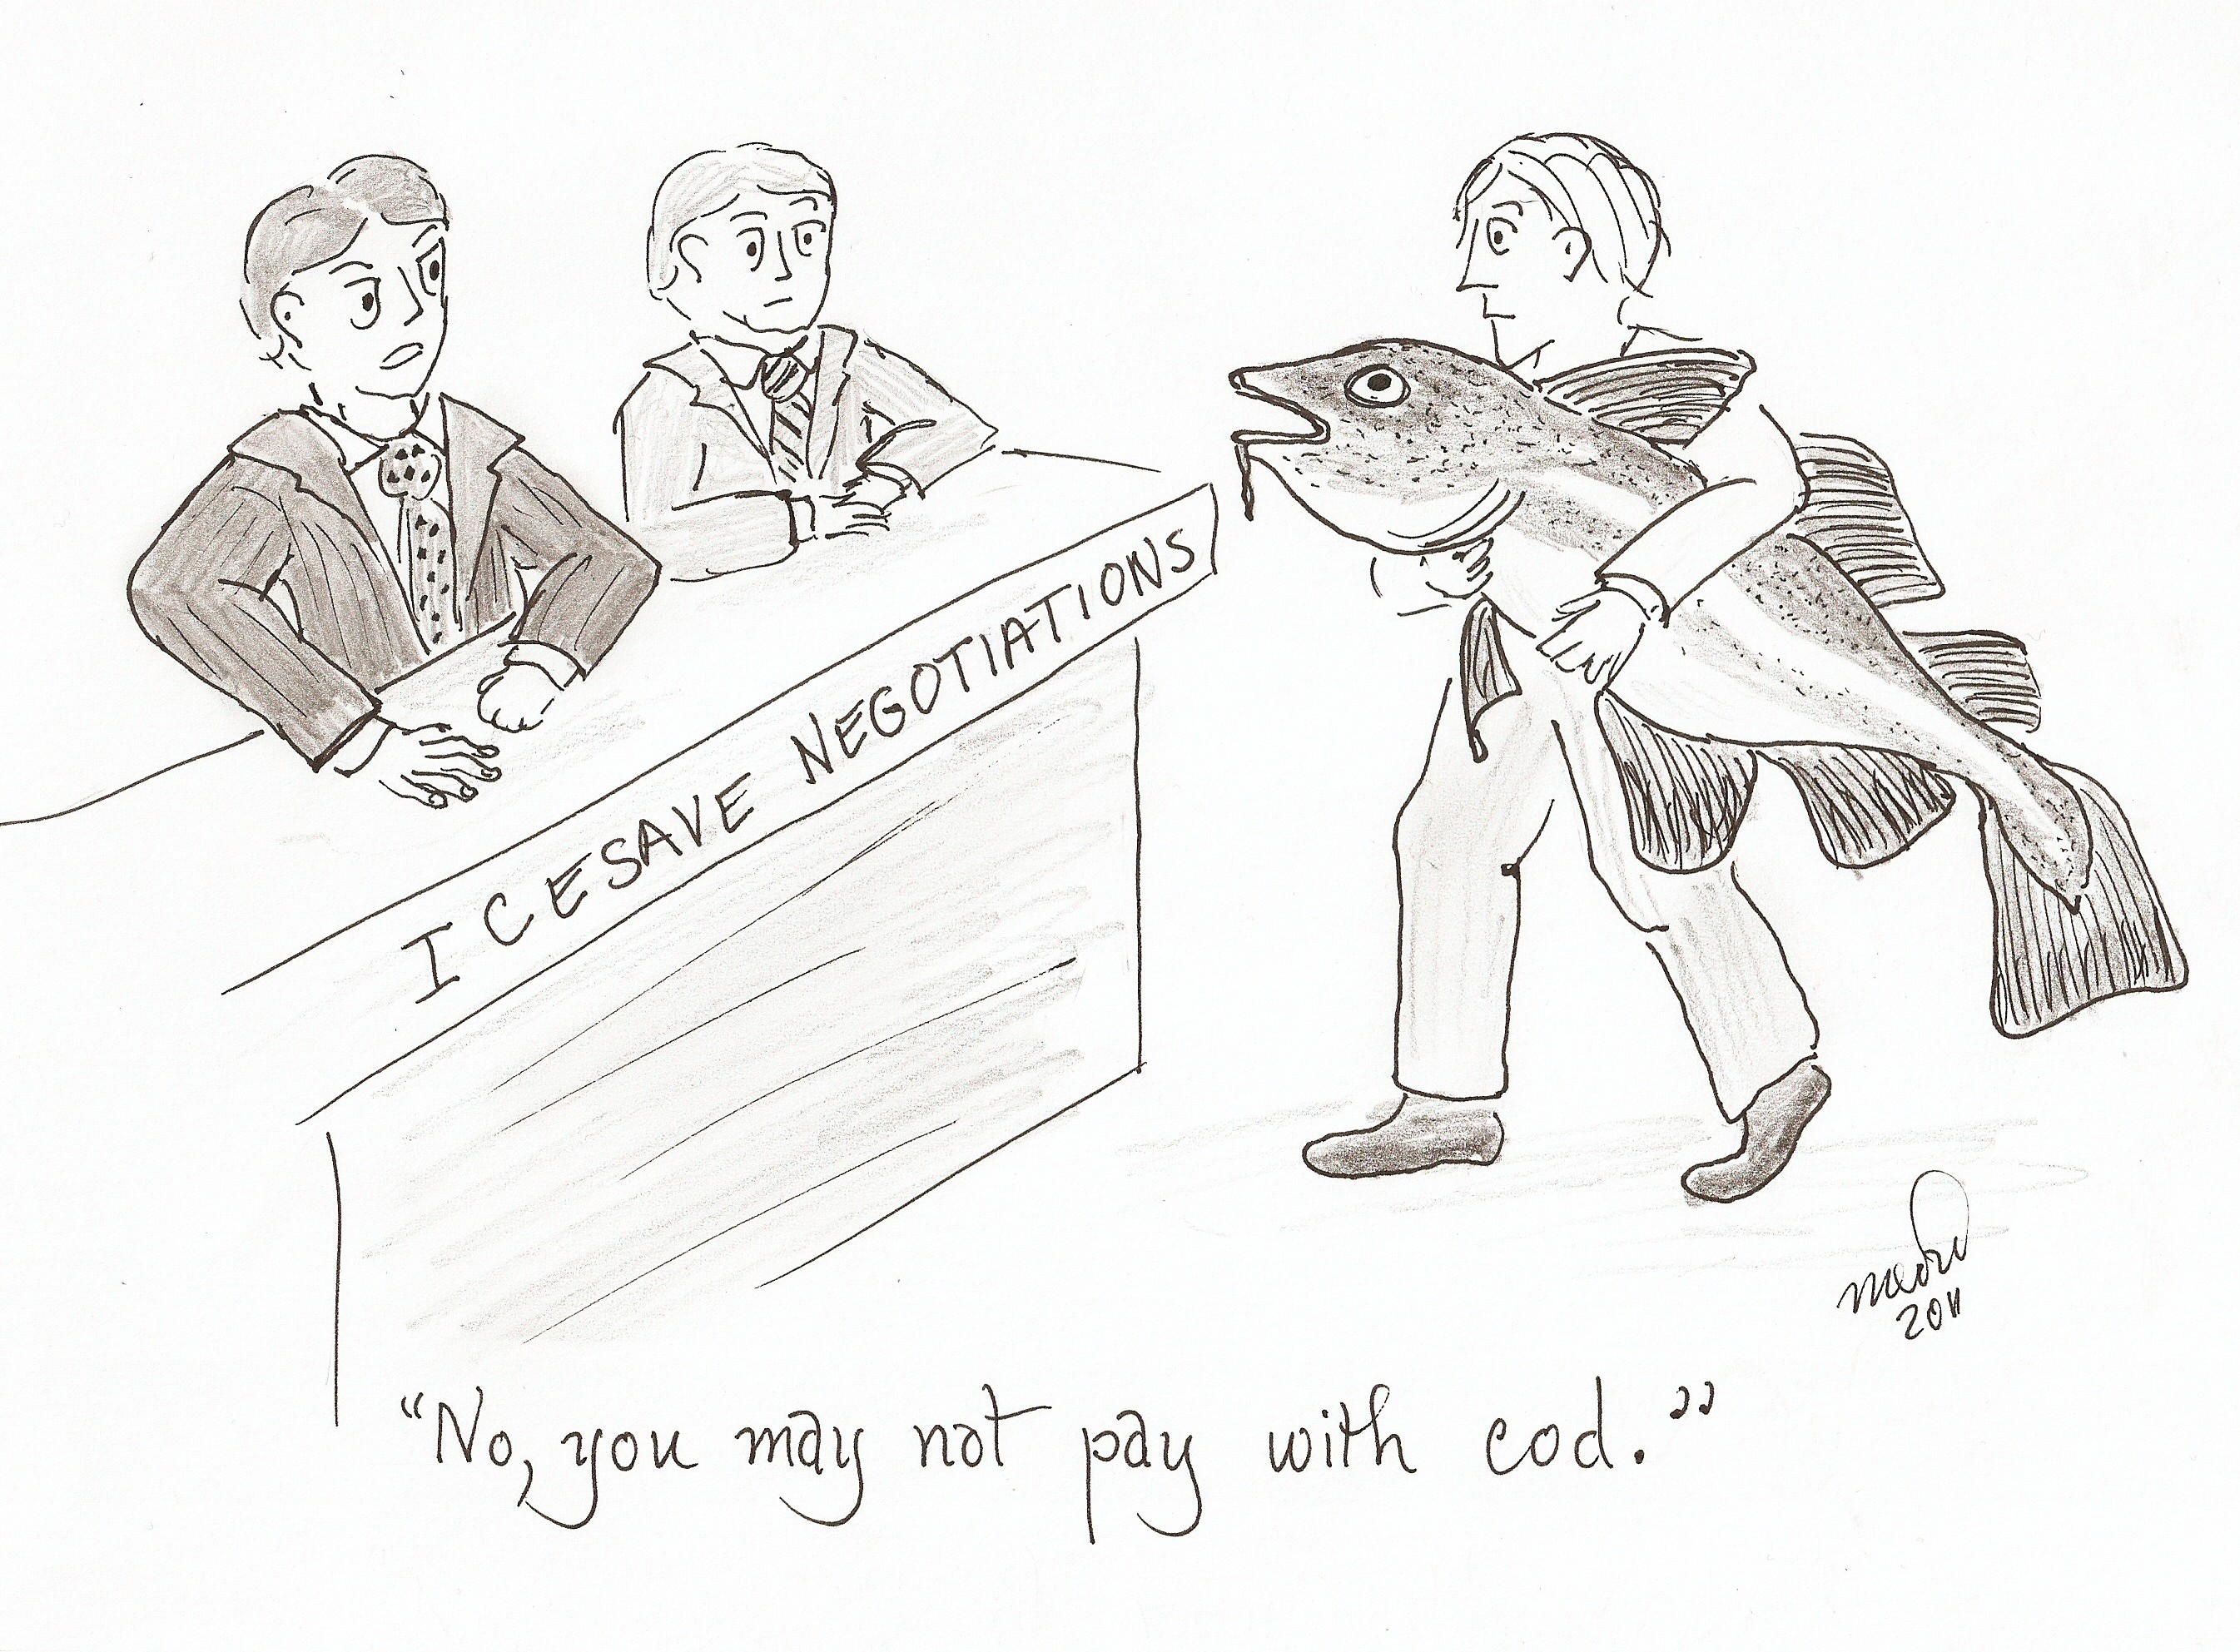 you cannot pay with cod cartoon